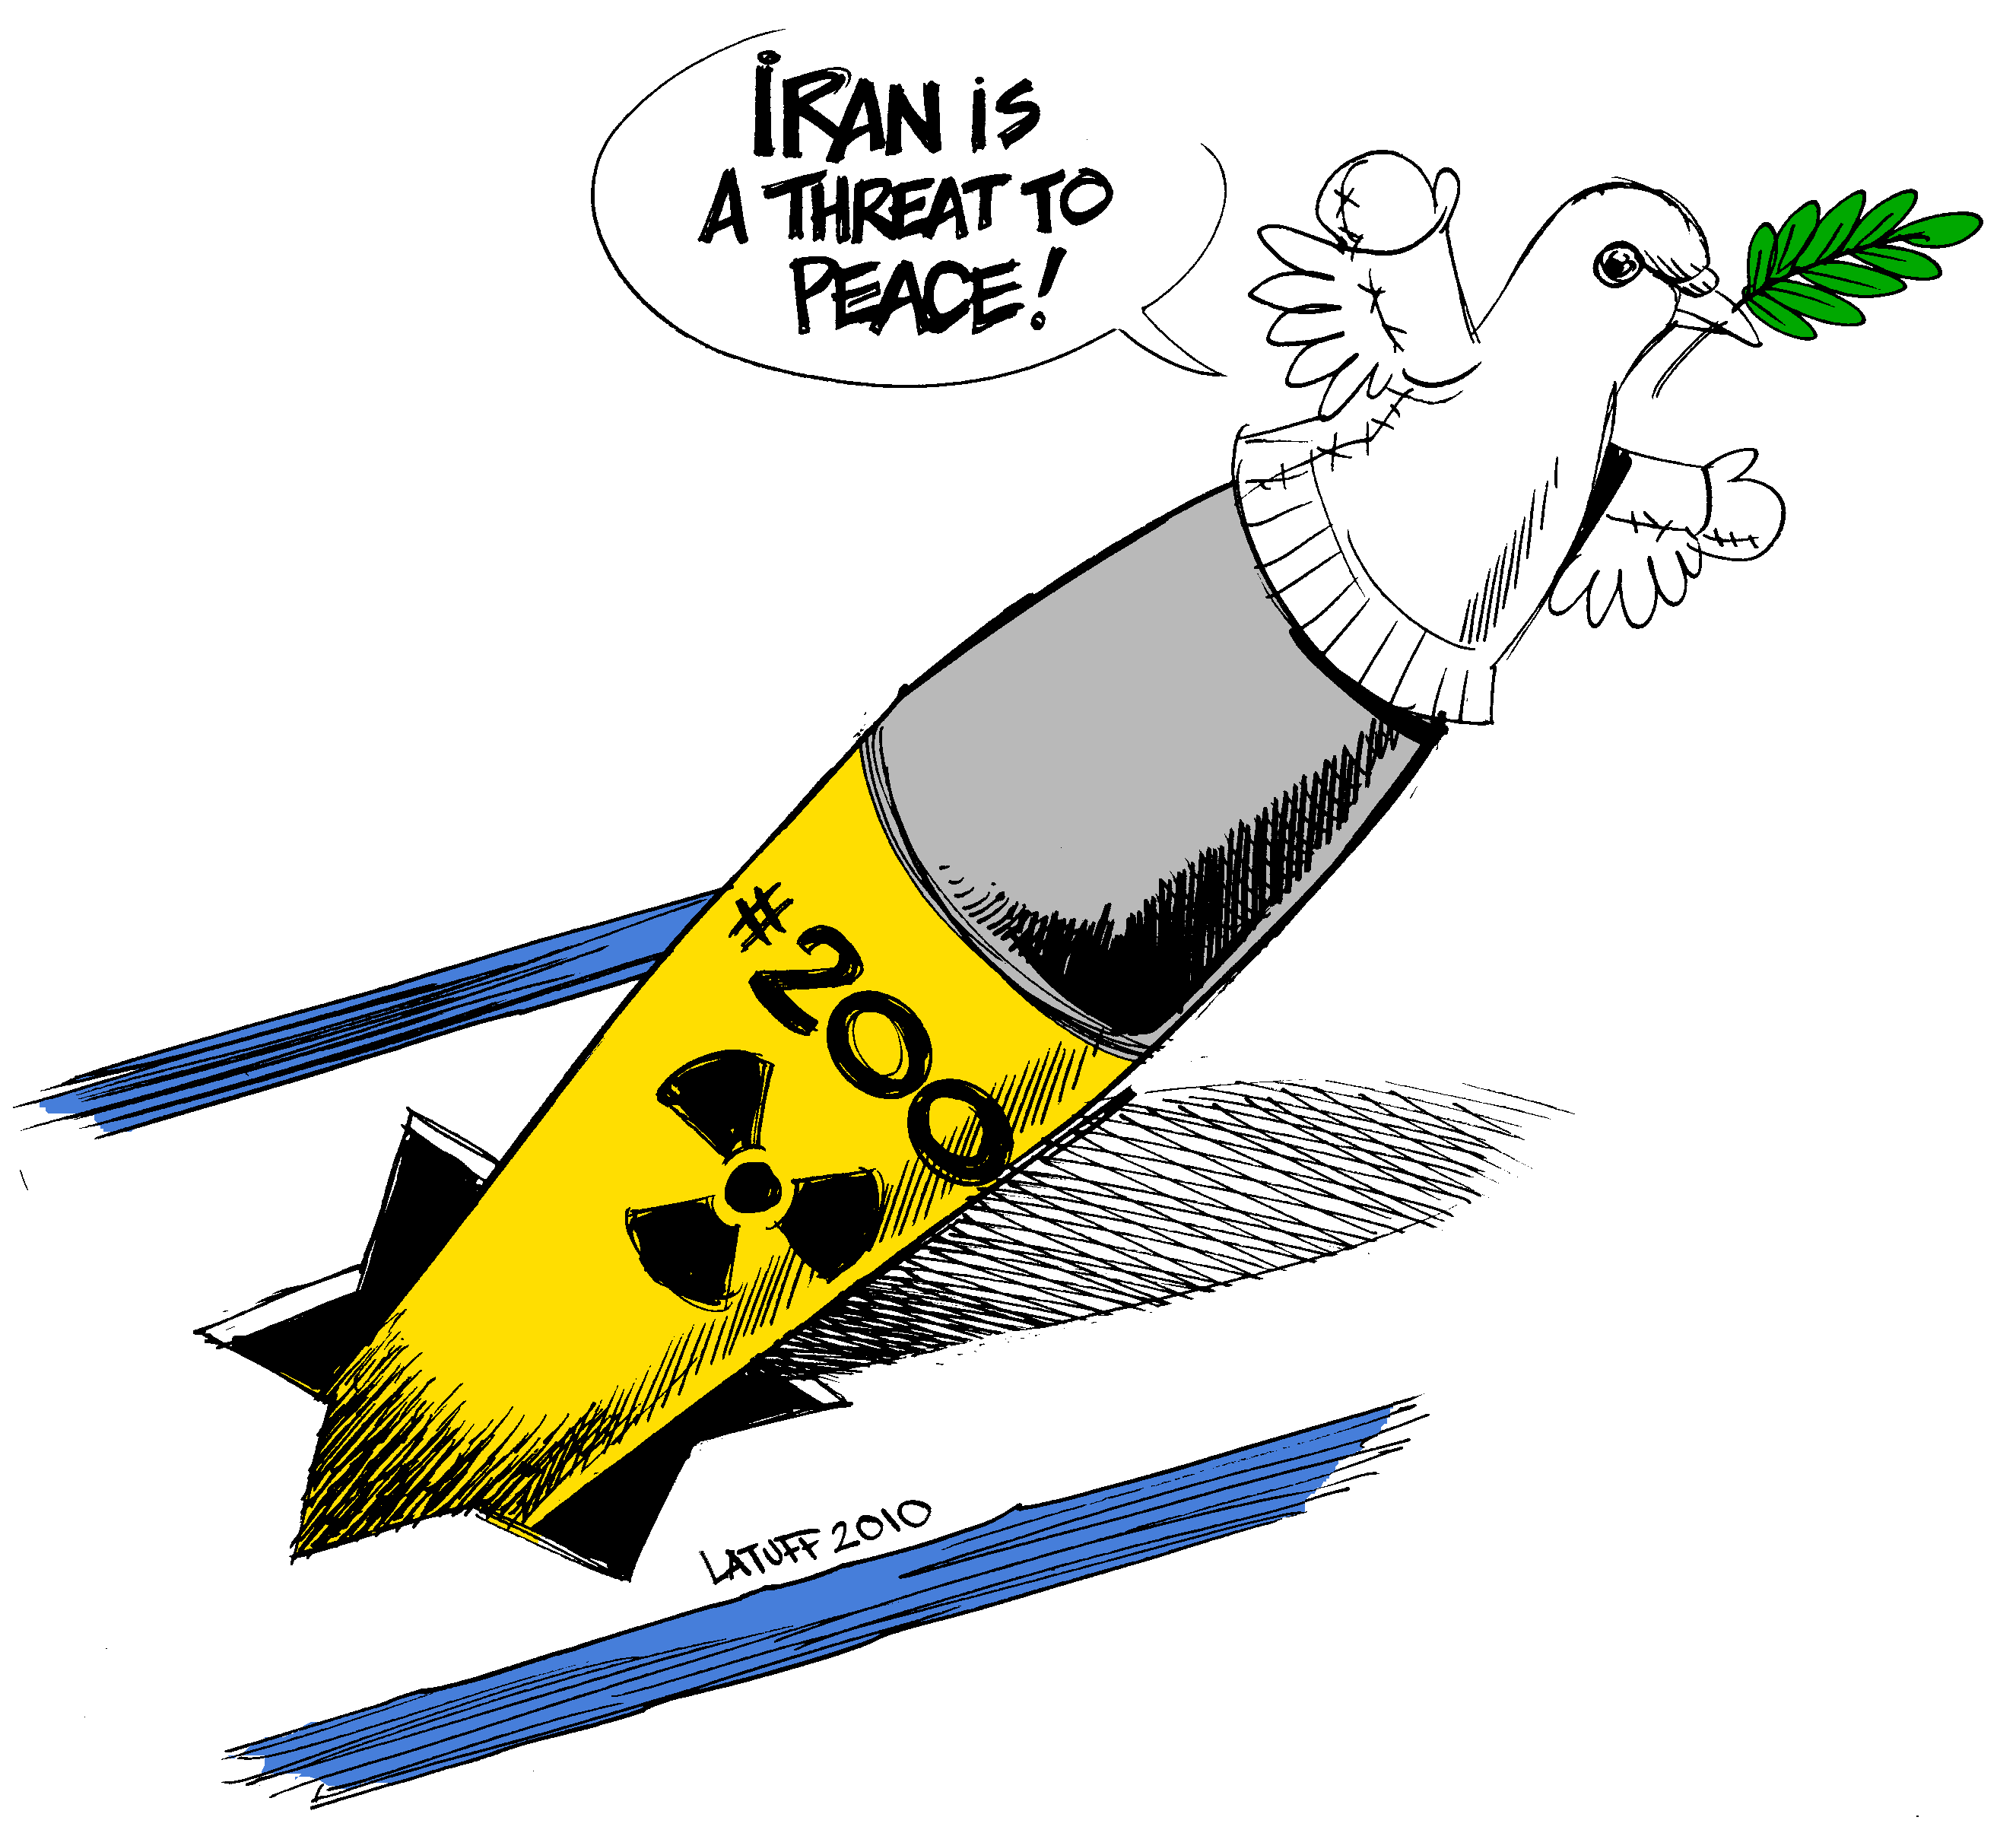 Israel: 'Iran Is a Threat to Peace'